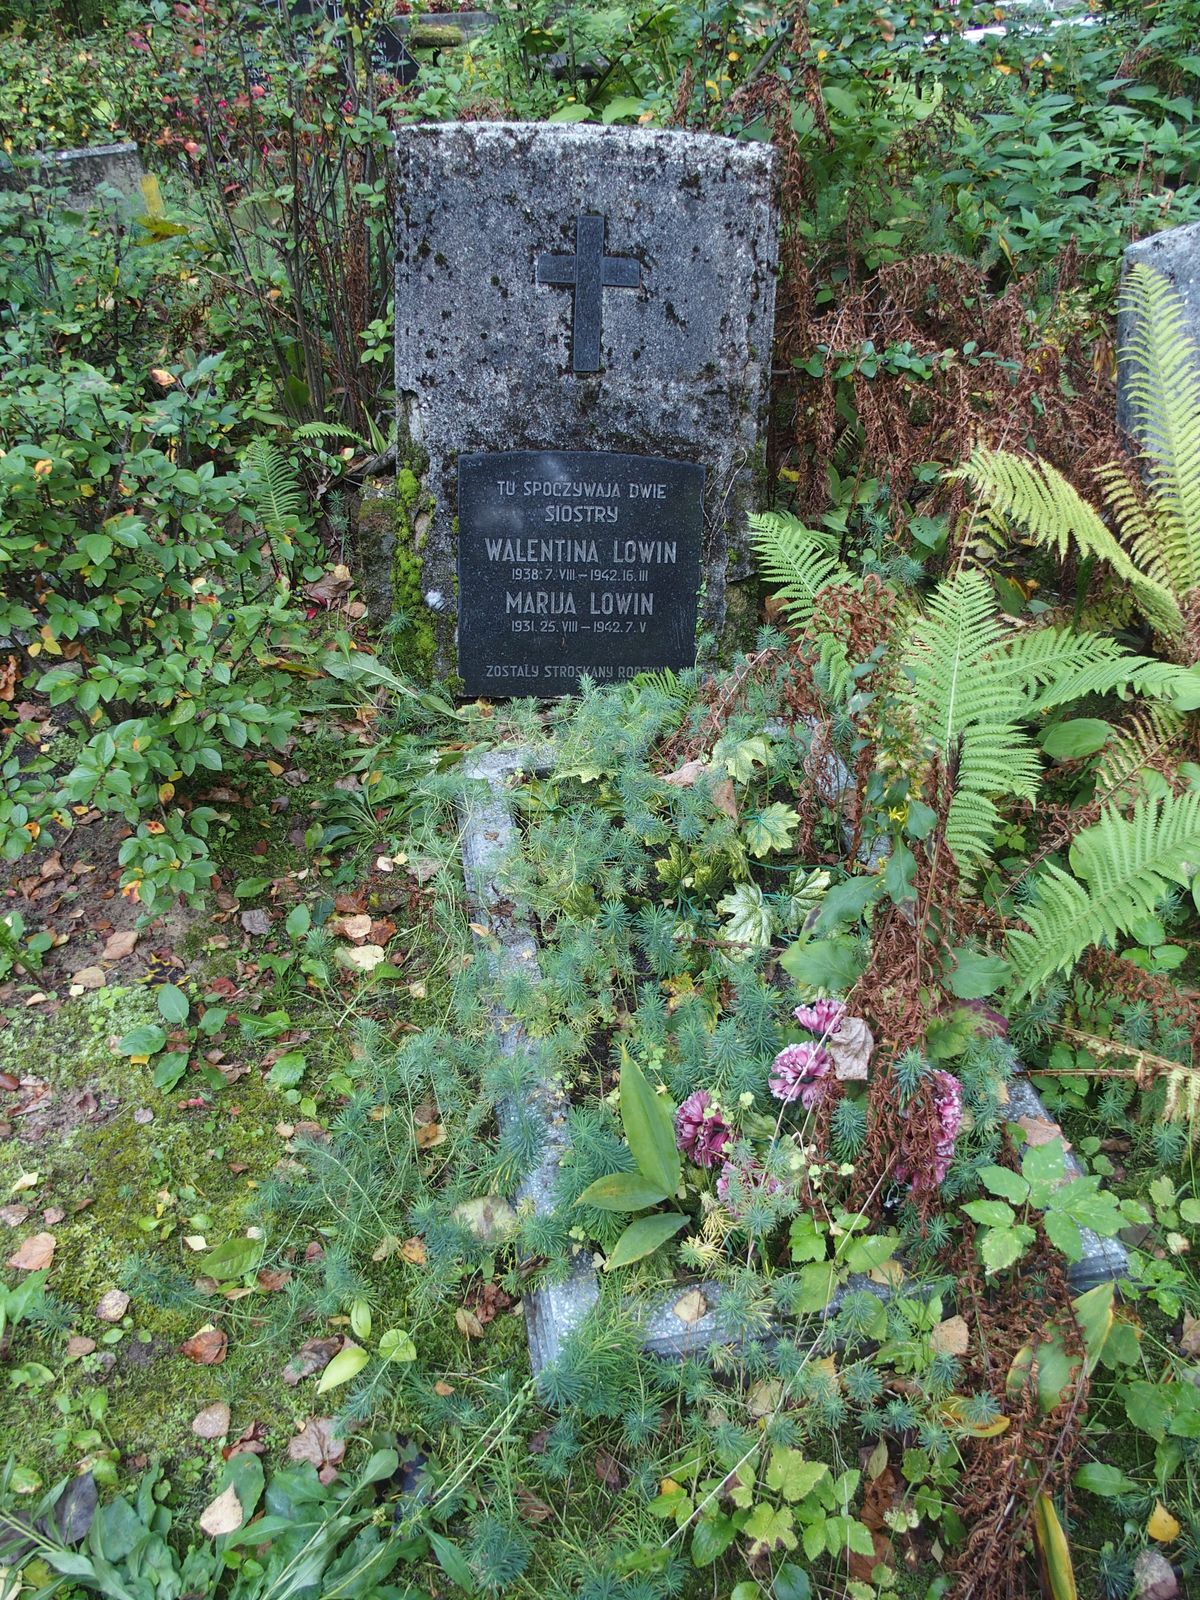 Tombstone of Maria Lowin and Valentina Lowin, St. Michael's cemetery in Riga, as of 2021